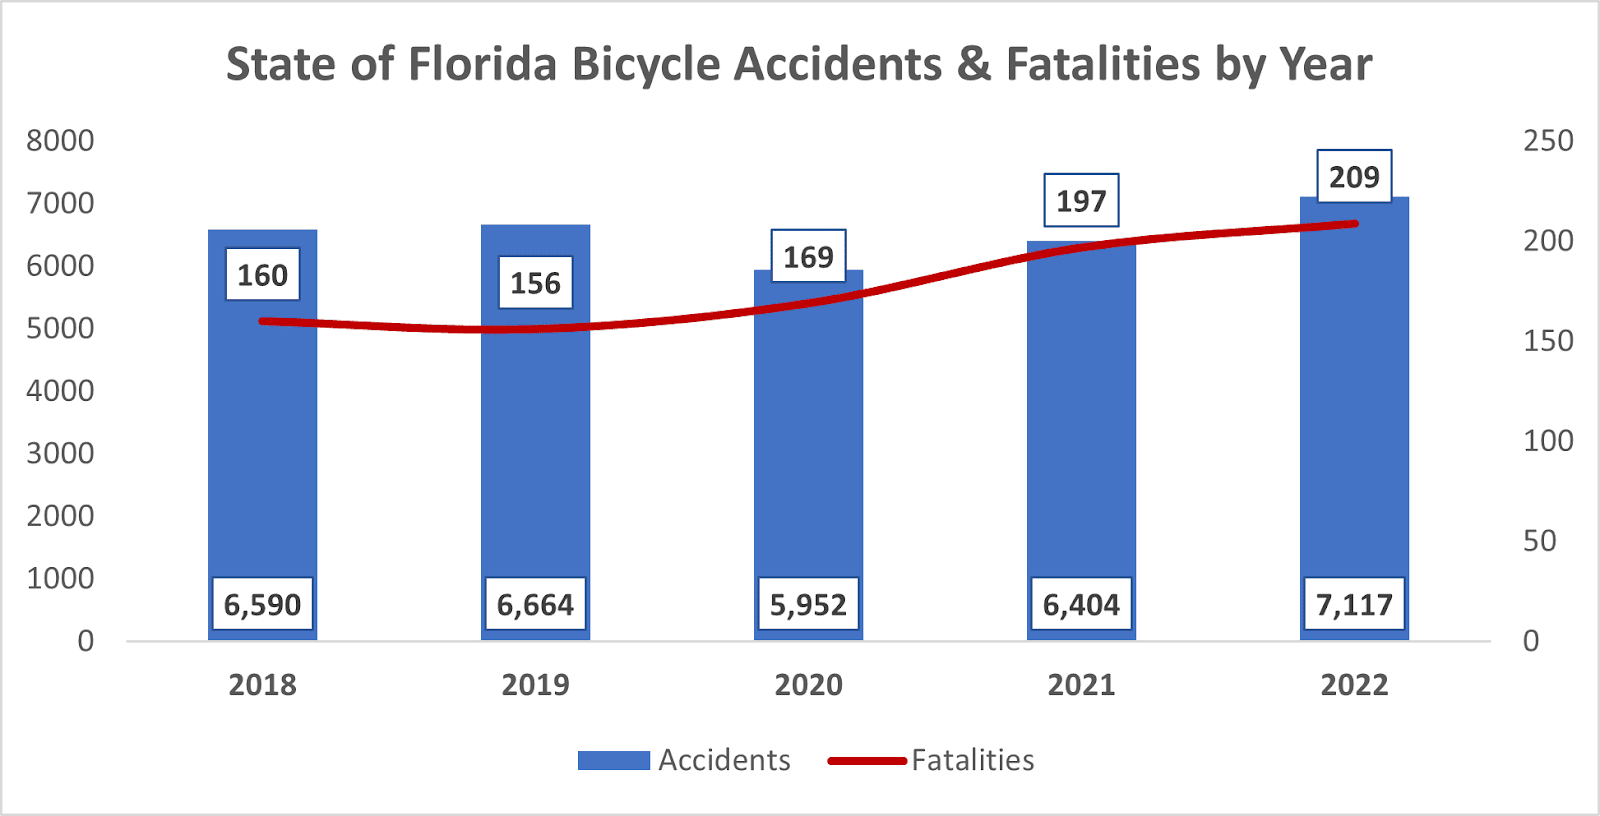 Graph of Bicycle accidents and fatalities in Florida from 2018-2022